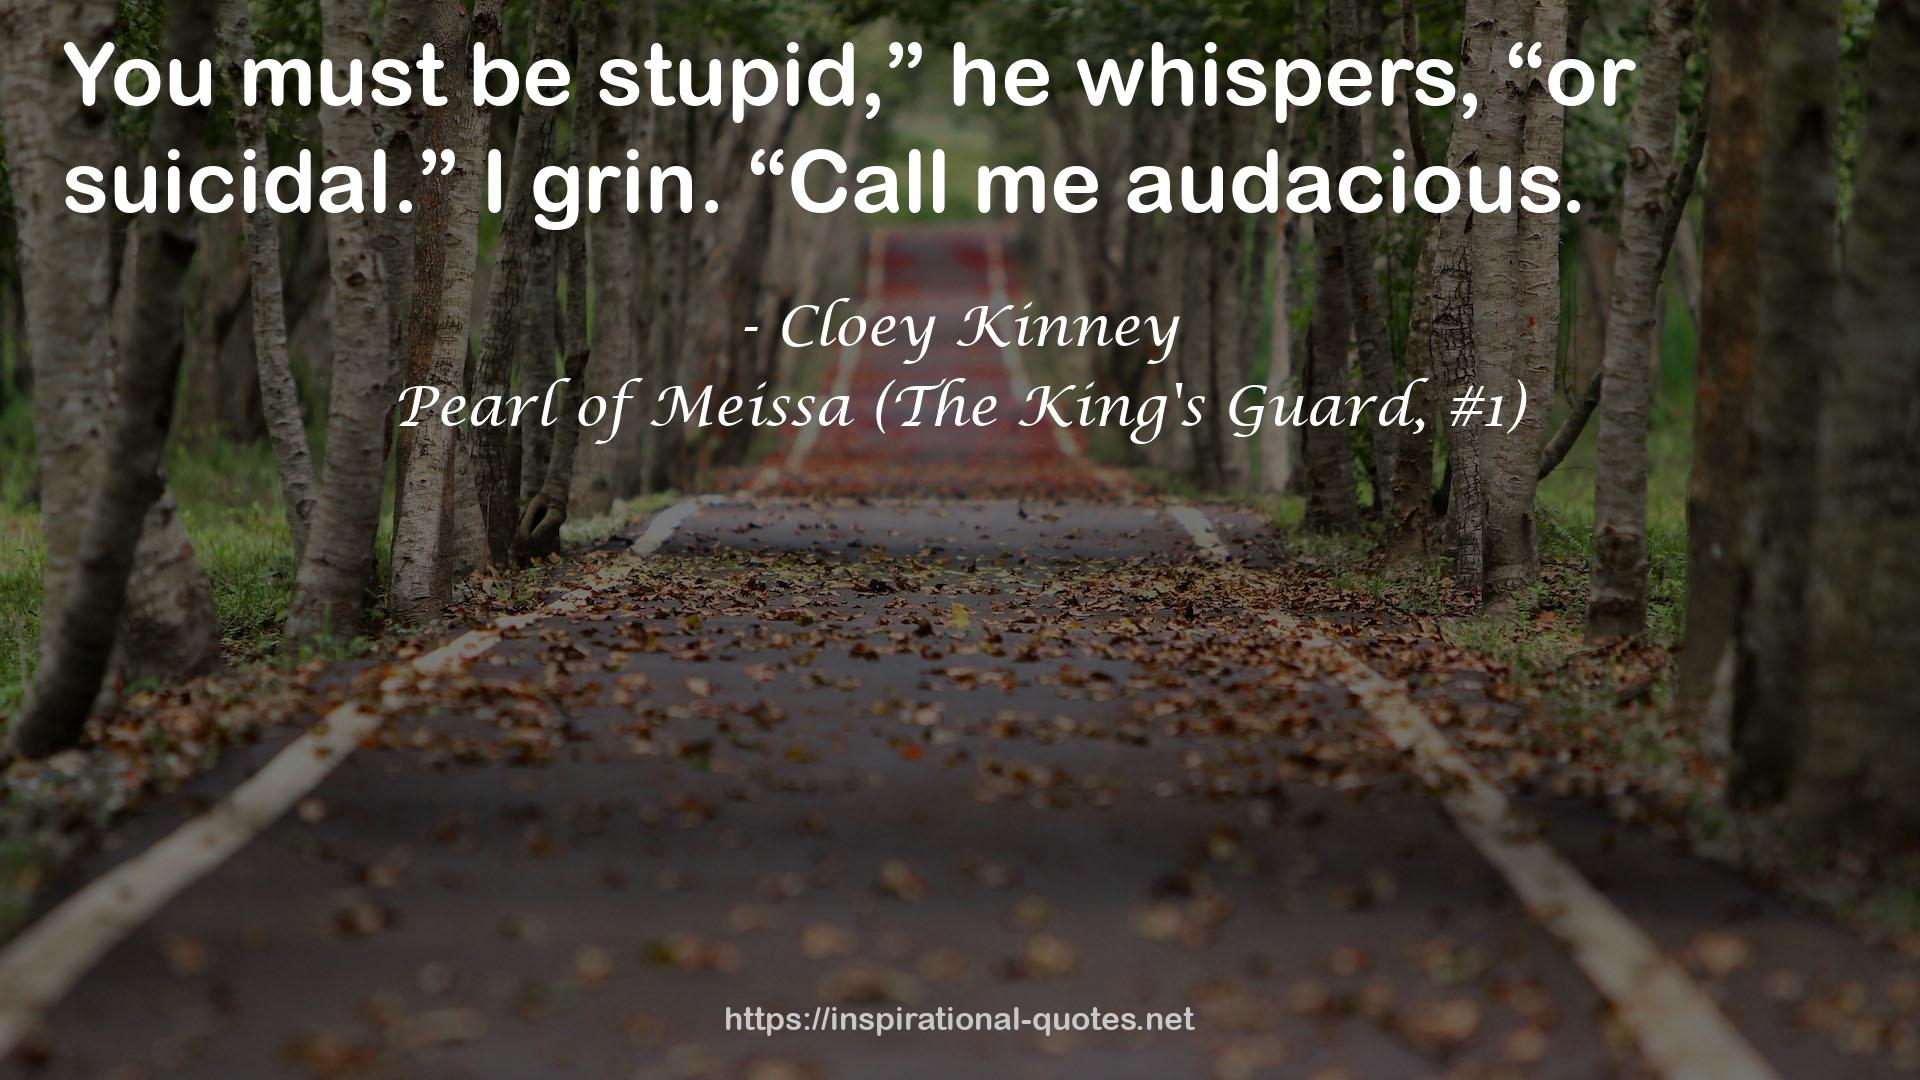 Pearl of Meissa (The King's Guard, #1) QUOTES